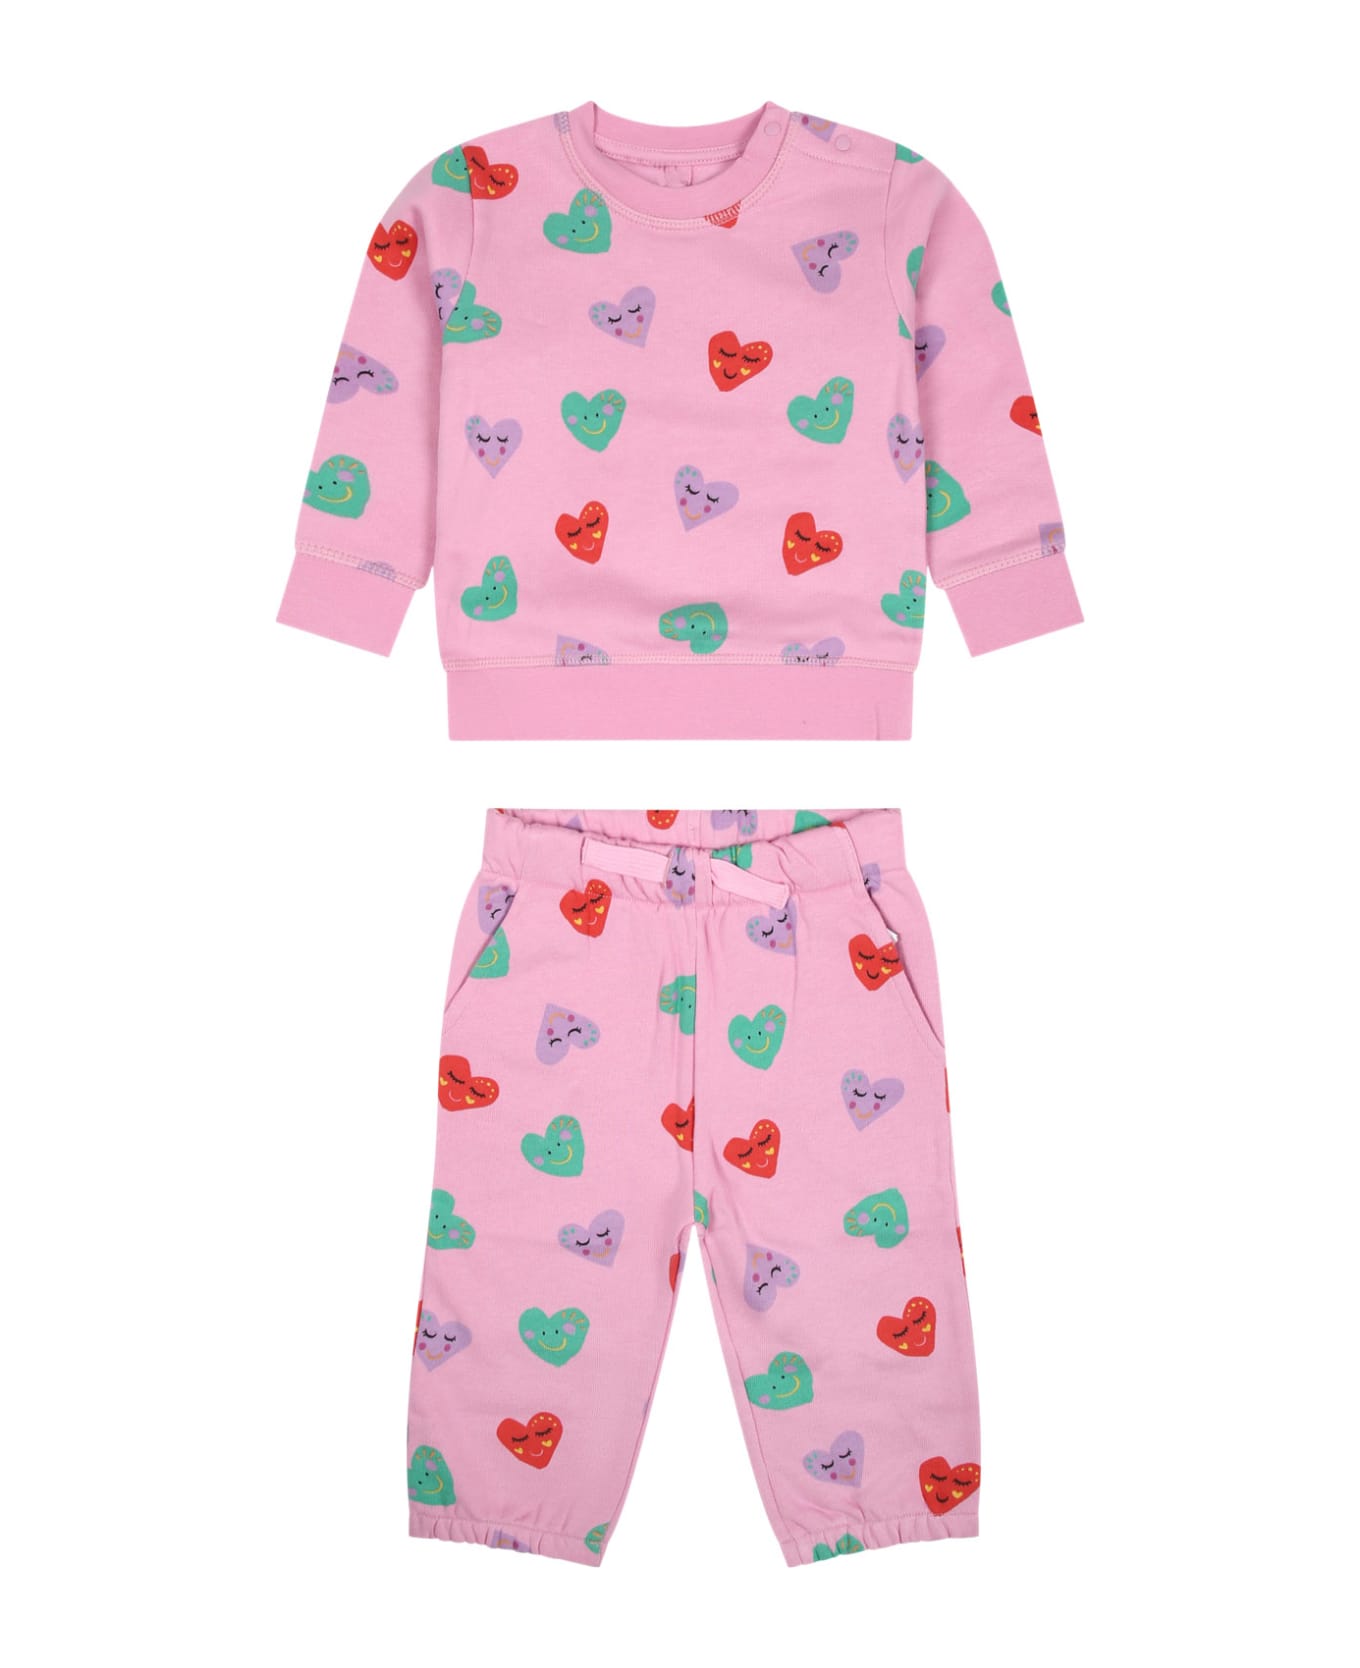 Stella McCartney Kids Pink Set For Baby Girl With All-over Multicolor Hearts - Pink